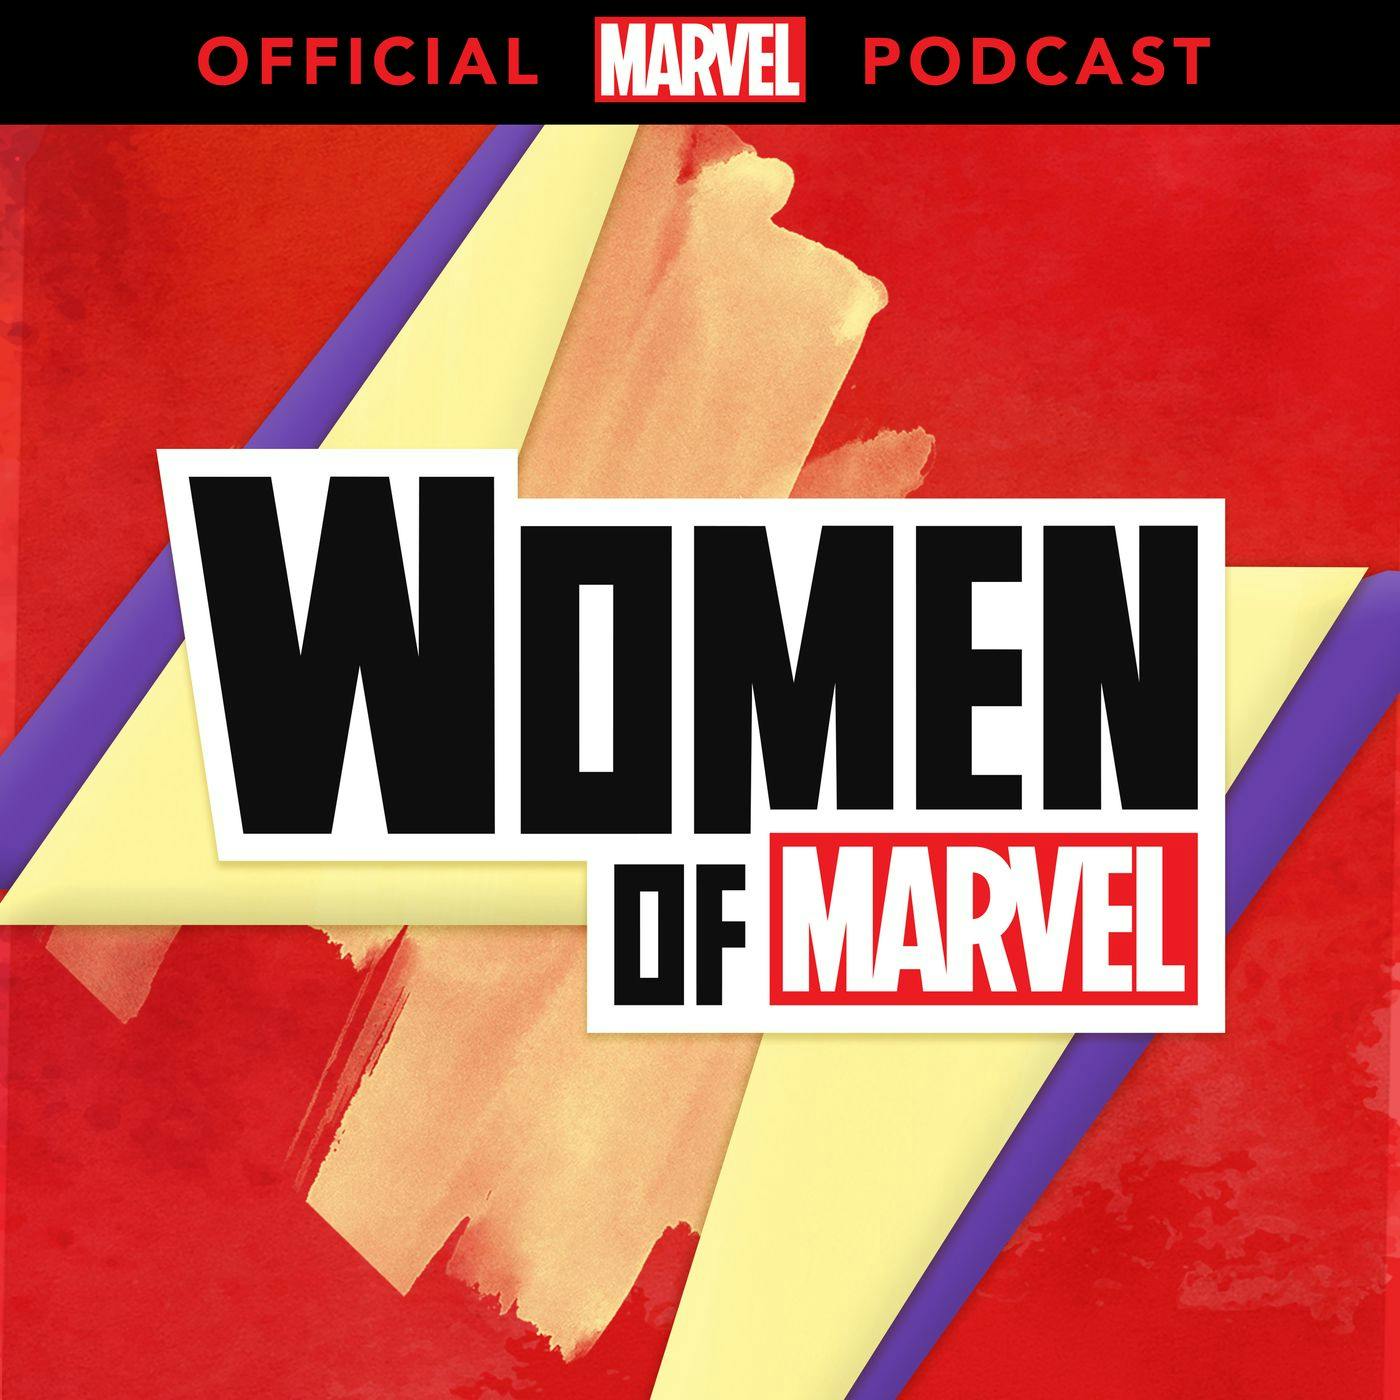 Ep 116 - Voices of Marvel with Roxane Gay